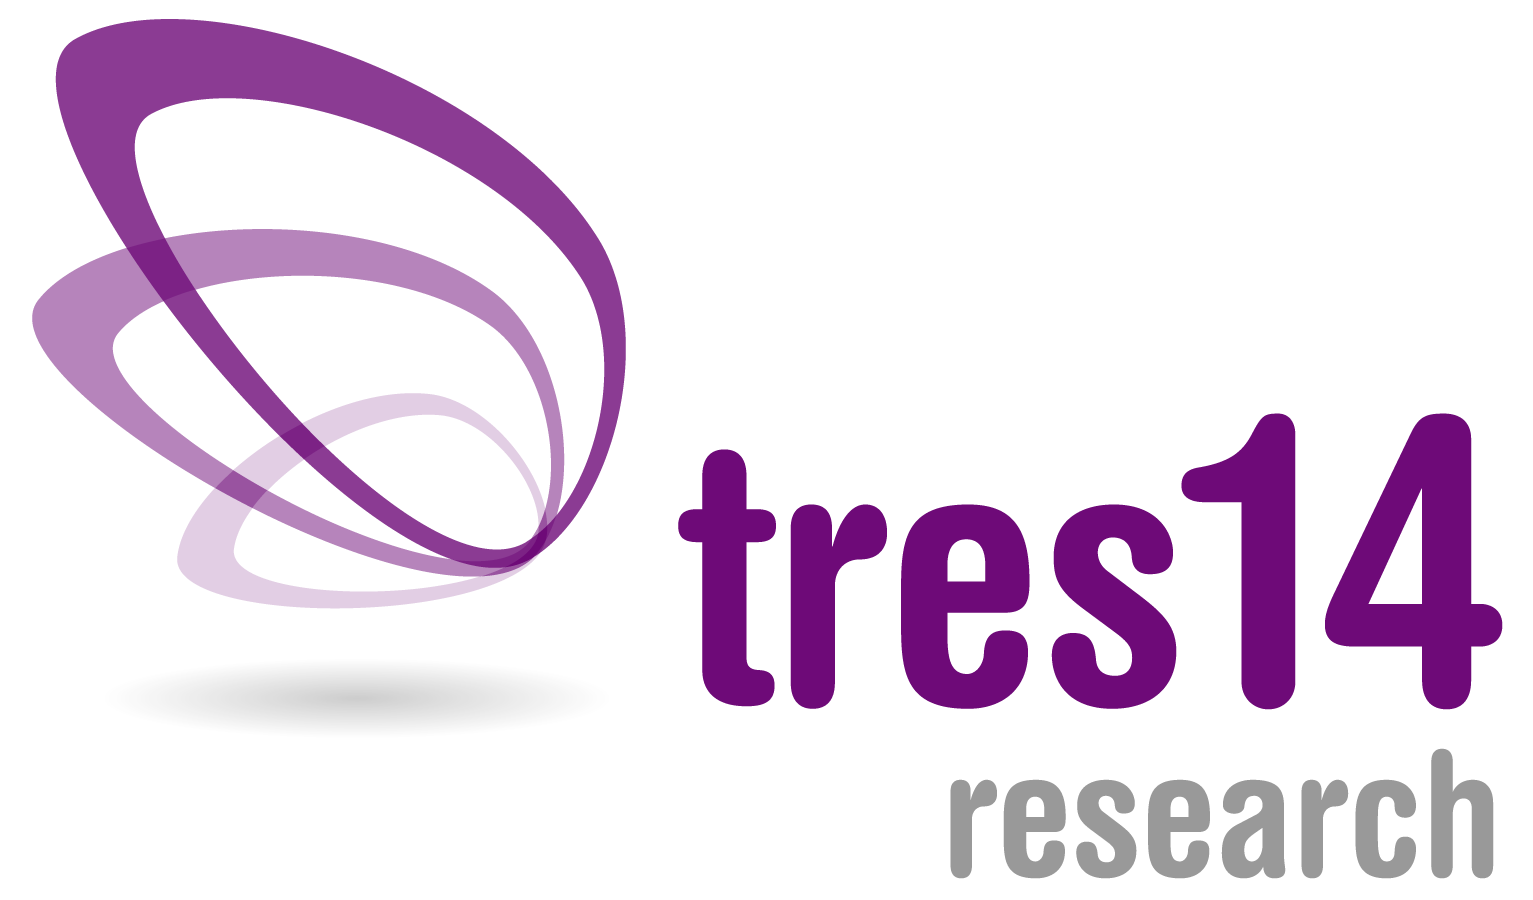 tres14 research